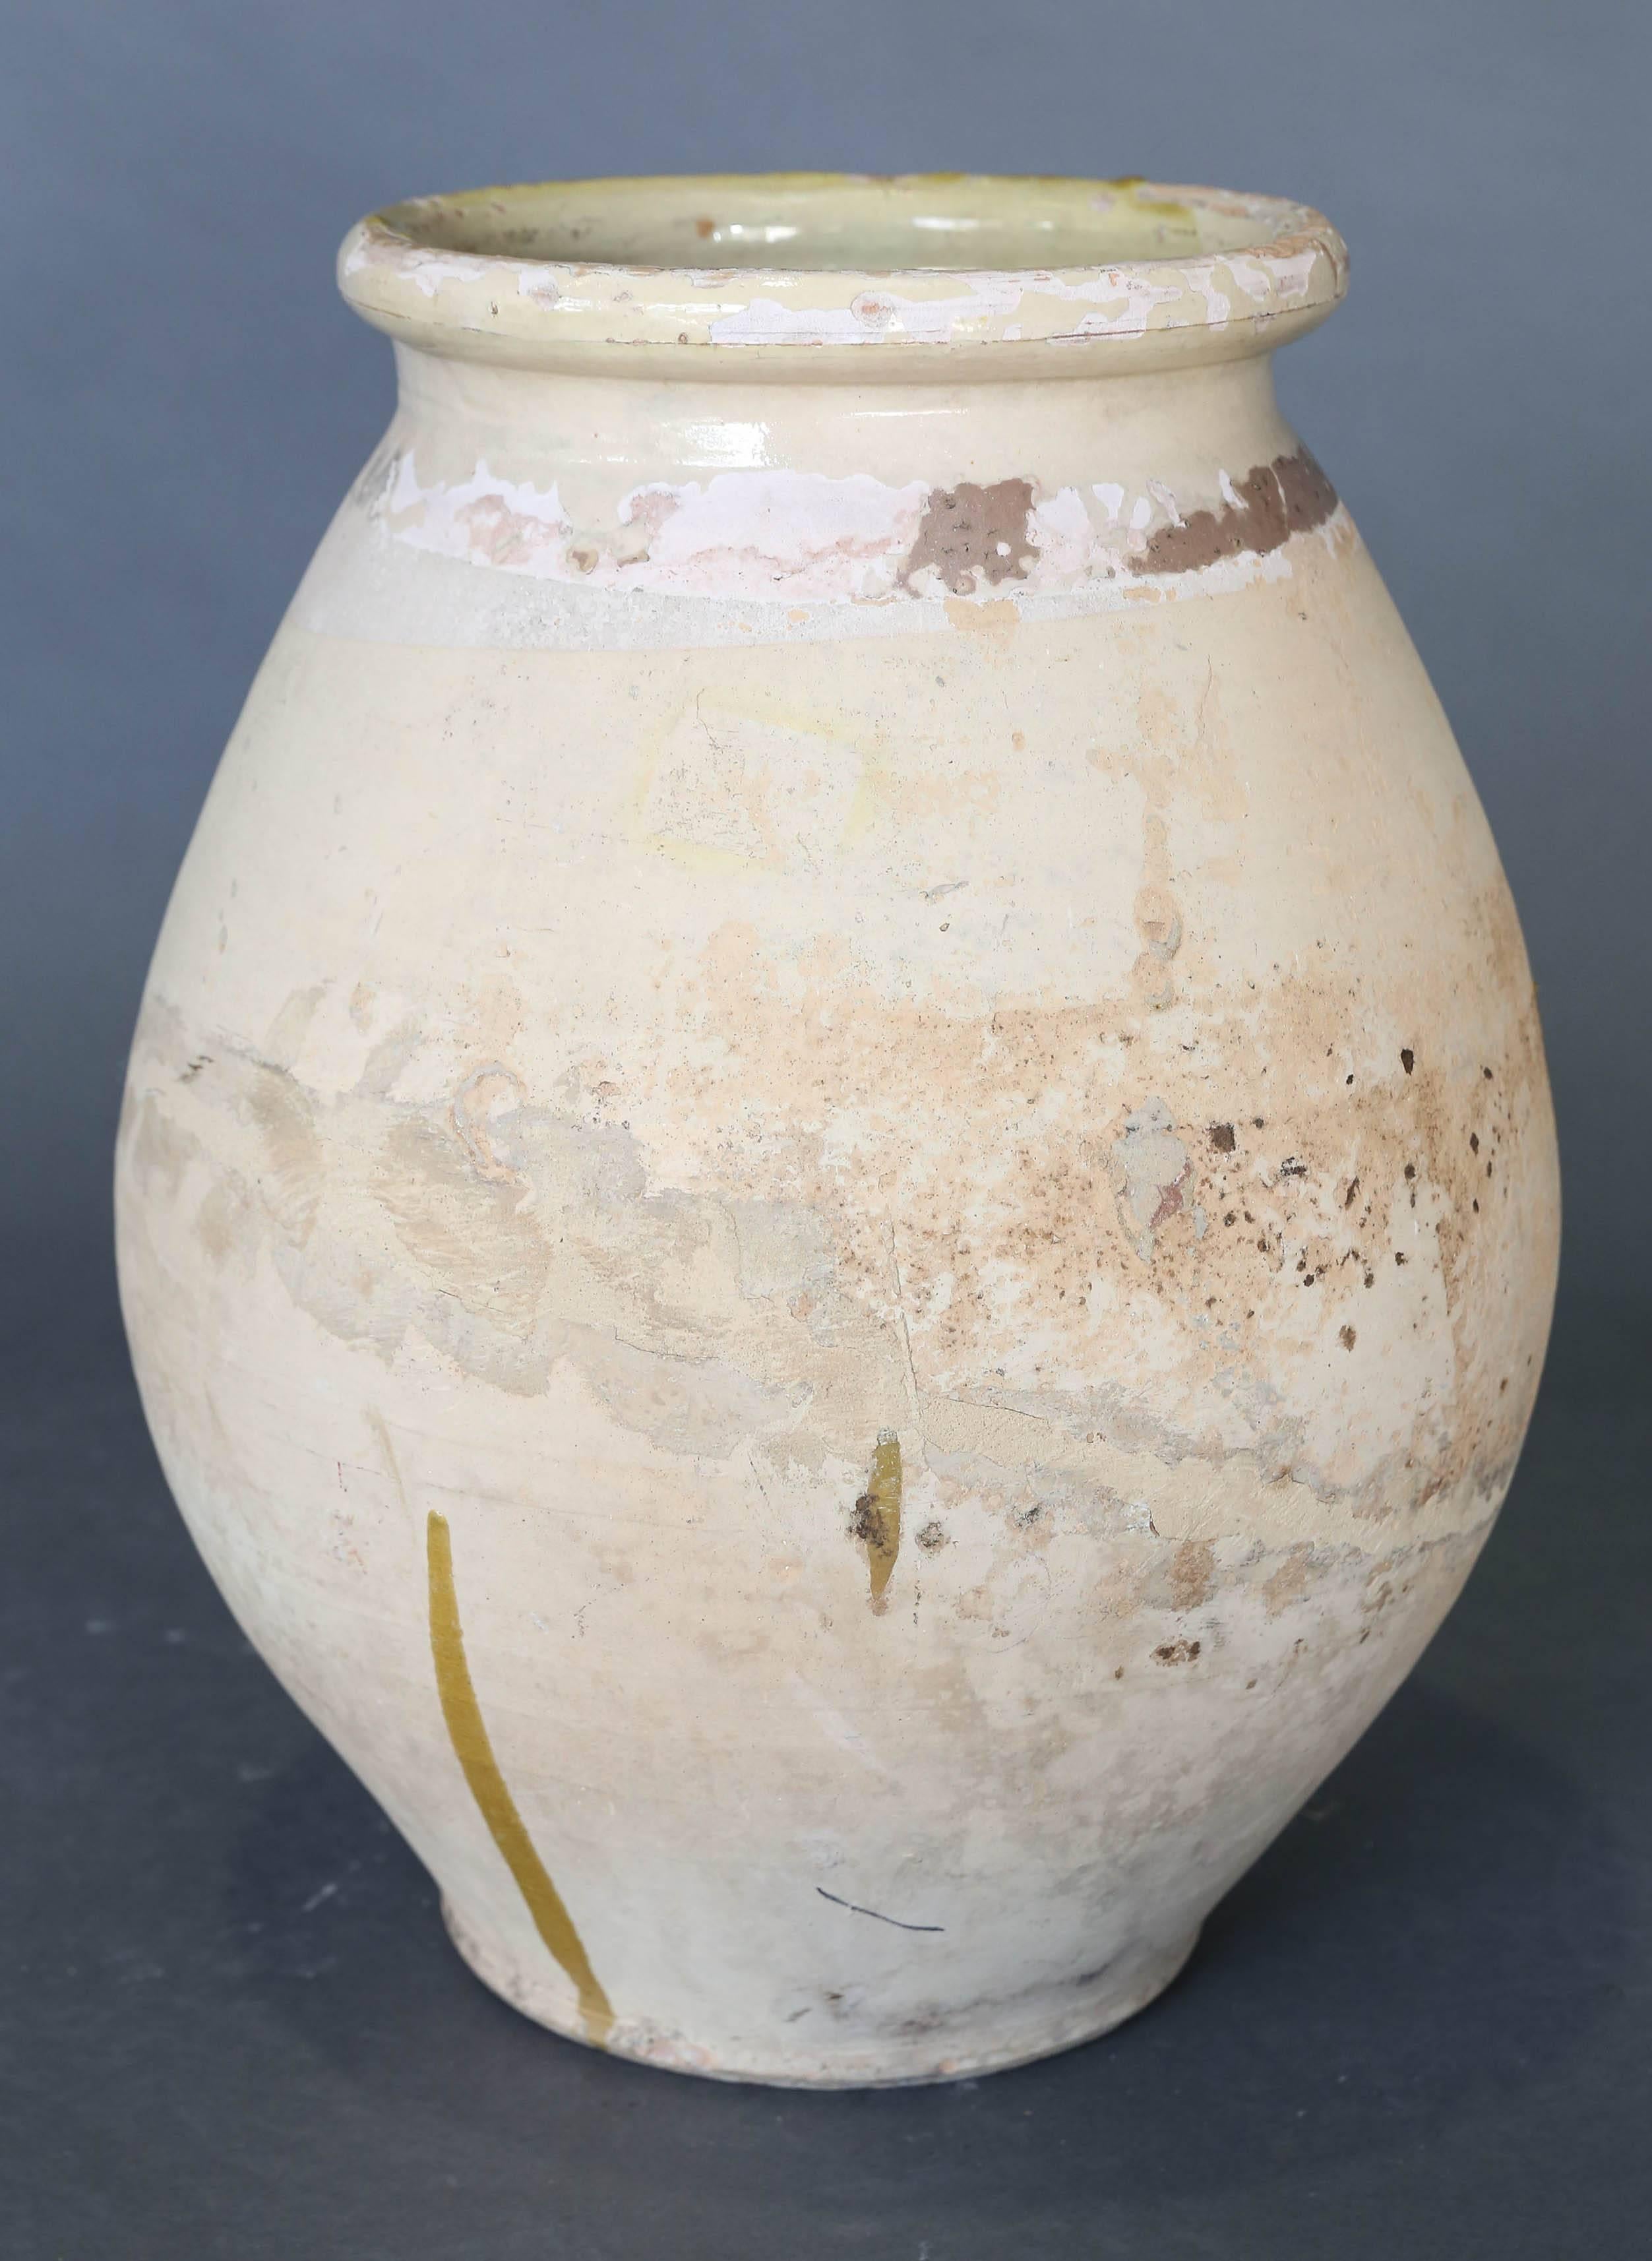 19th century Biot jar from France used to store and ship olives aboard ships.
       